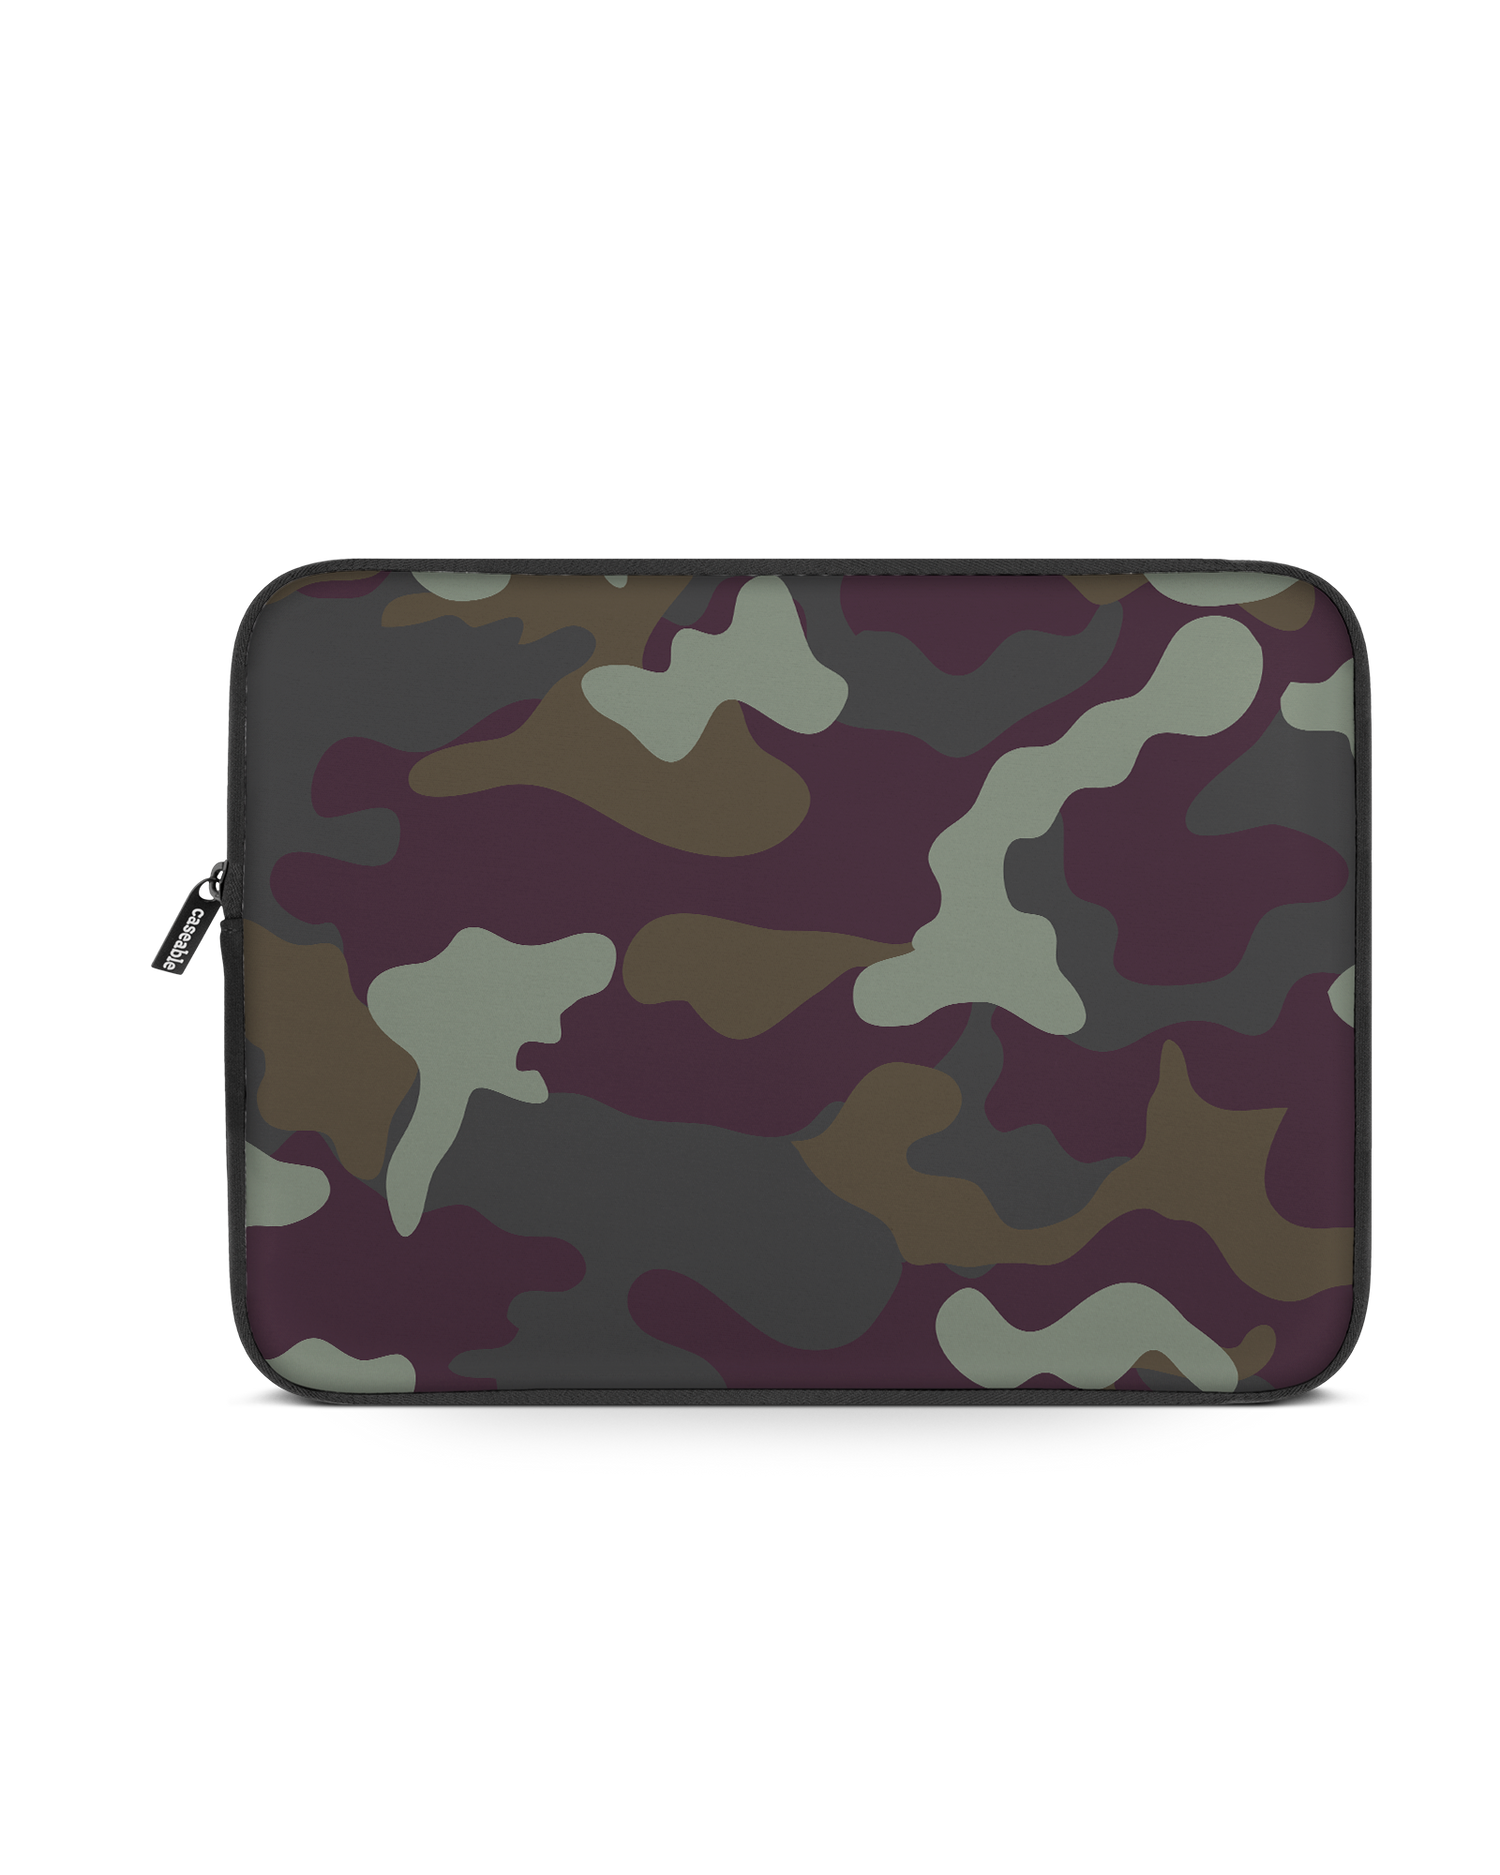 Night Camo Laptop Case 13 inch: Front View